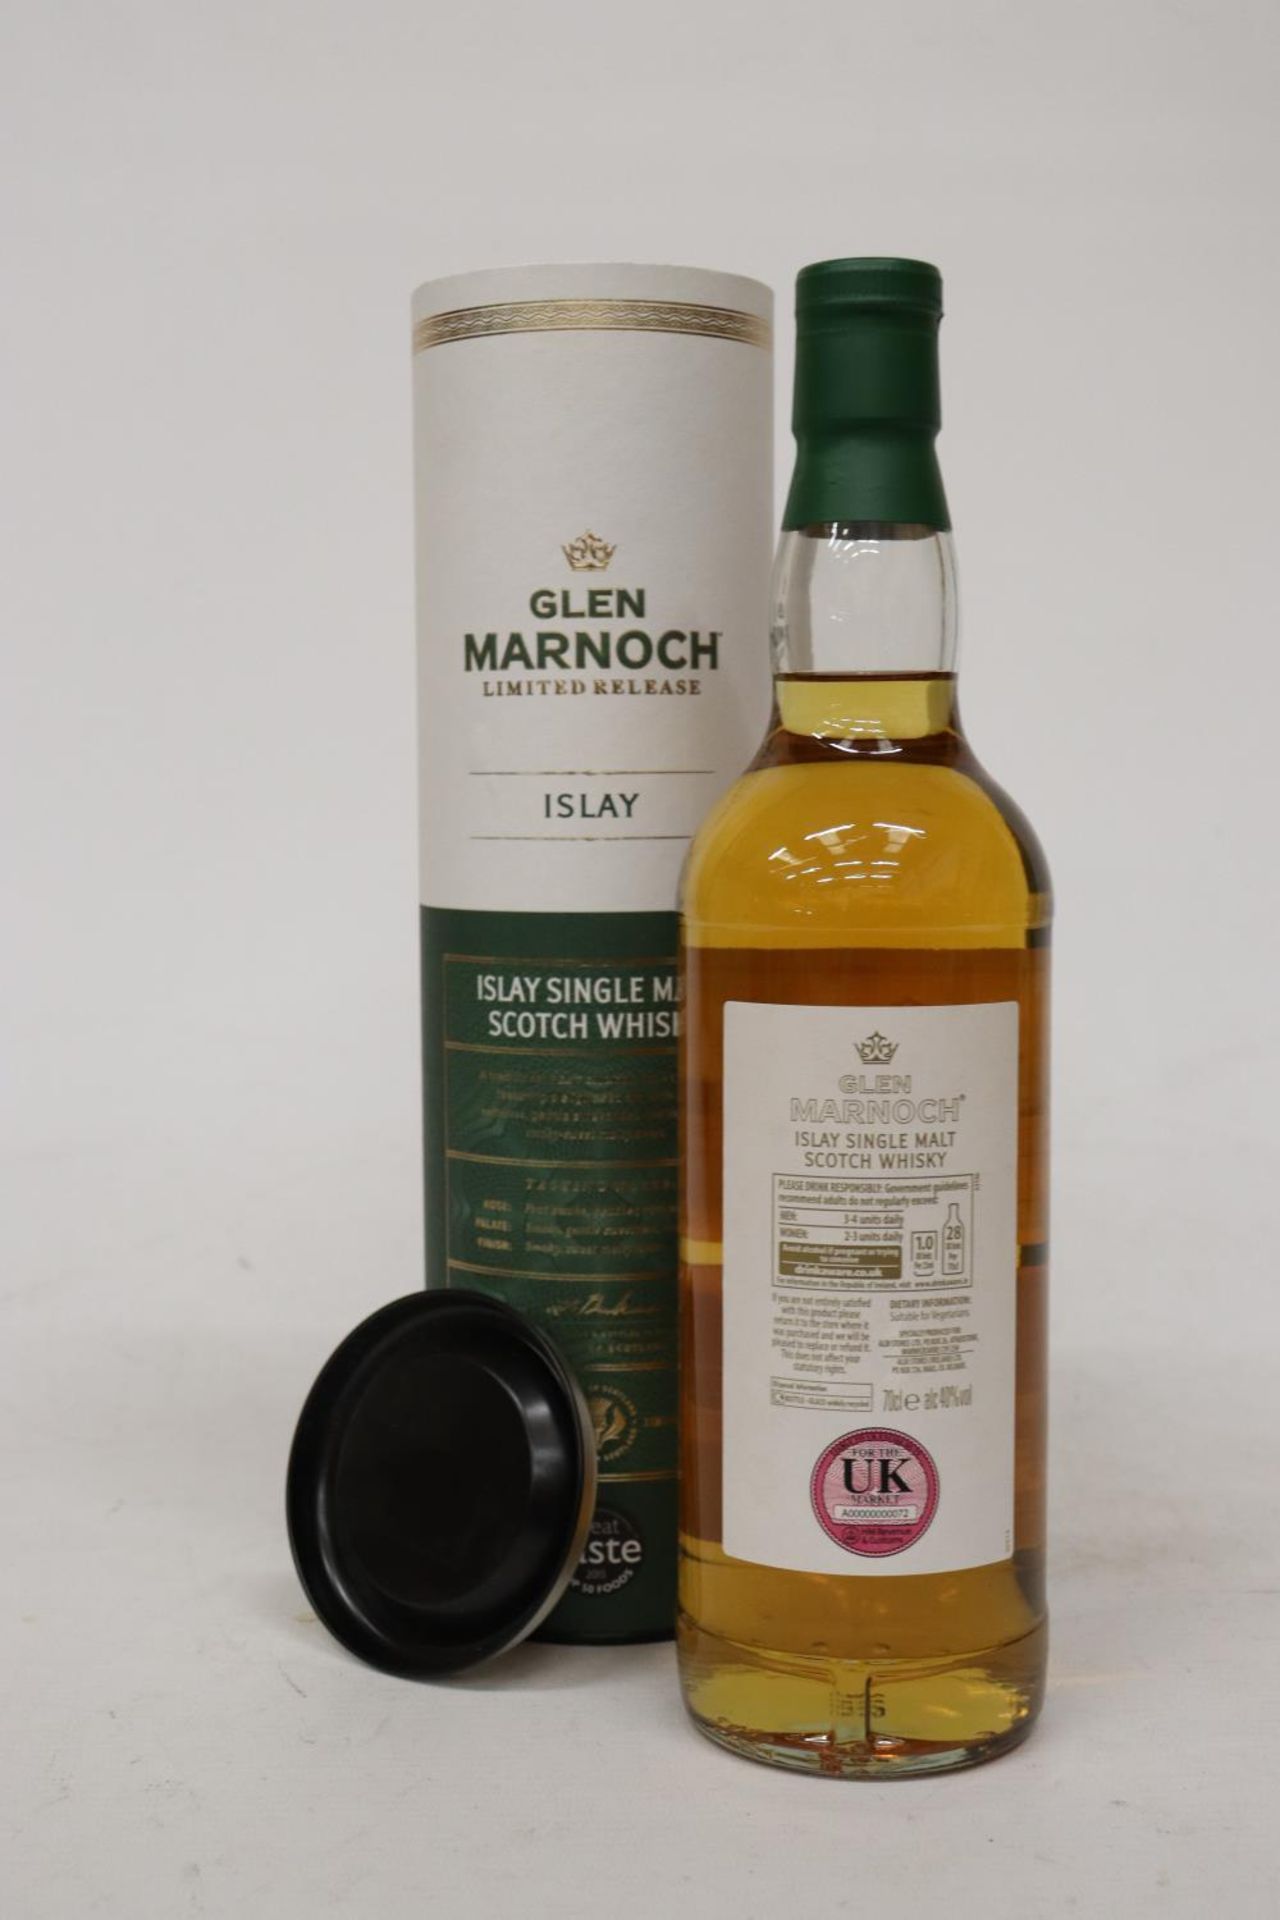 A BOTTLE OF GLENMARNOCH ISLAY LIMITED RELEASE WHISKY, BOXED - Image 2 of 4